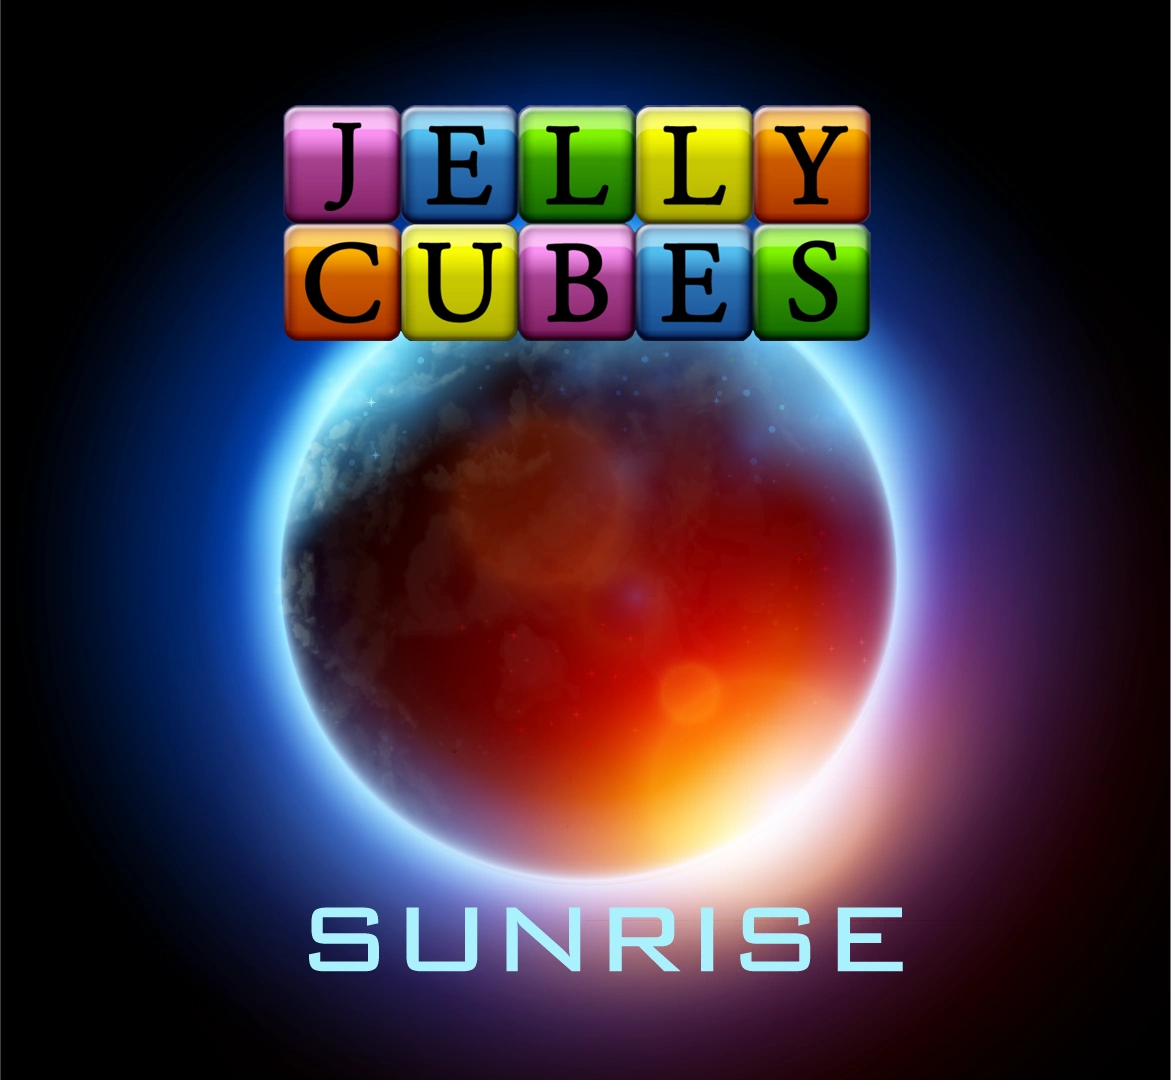 Jelly Cubes, Puzzle Game for iOS